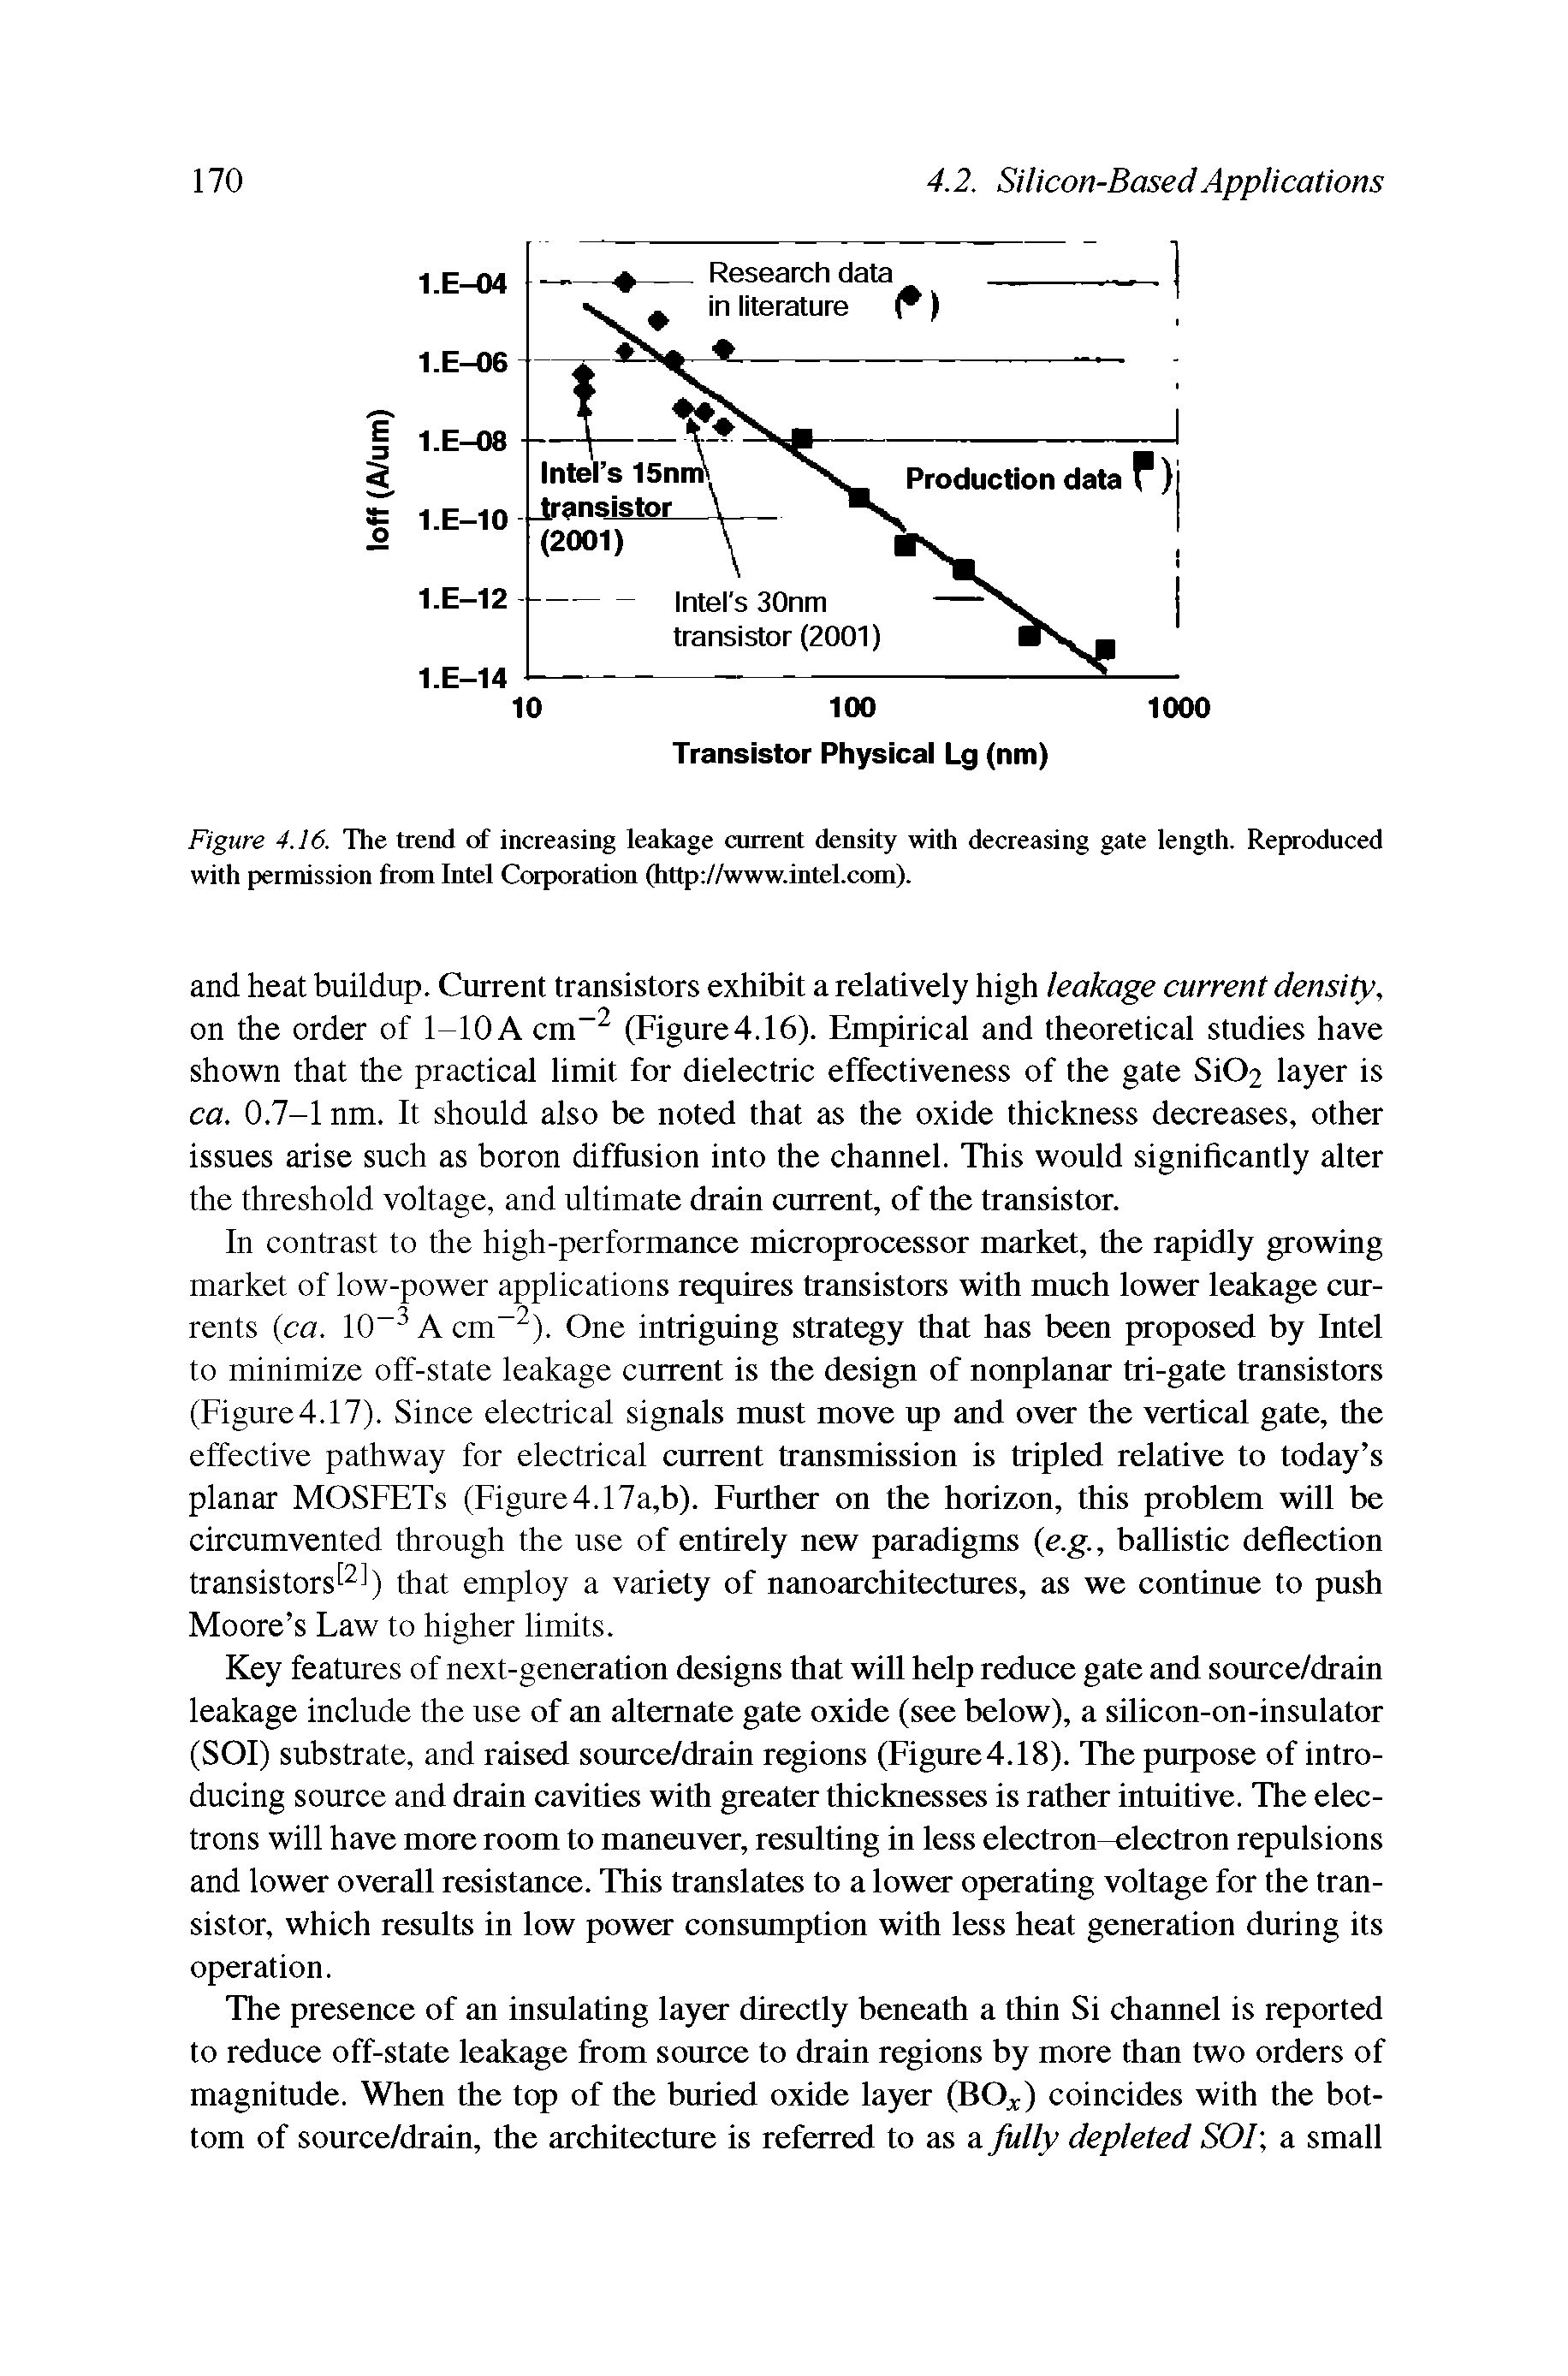 Figure 4.16. The trend of increasing leakage current density with decreasing gate length. Reproduced with permission from Intel Corporation (http //www.intel.com).